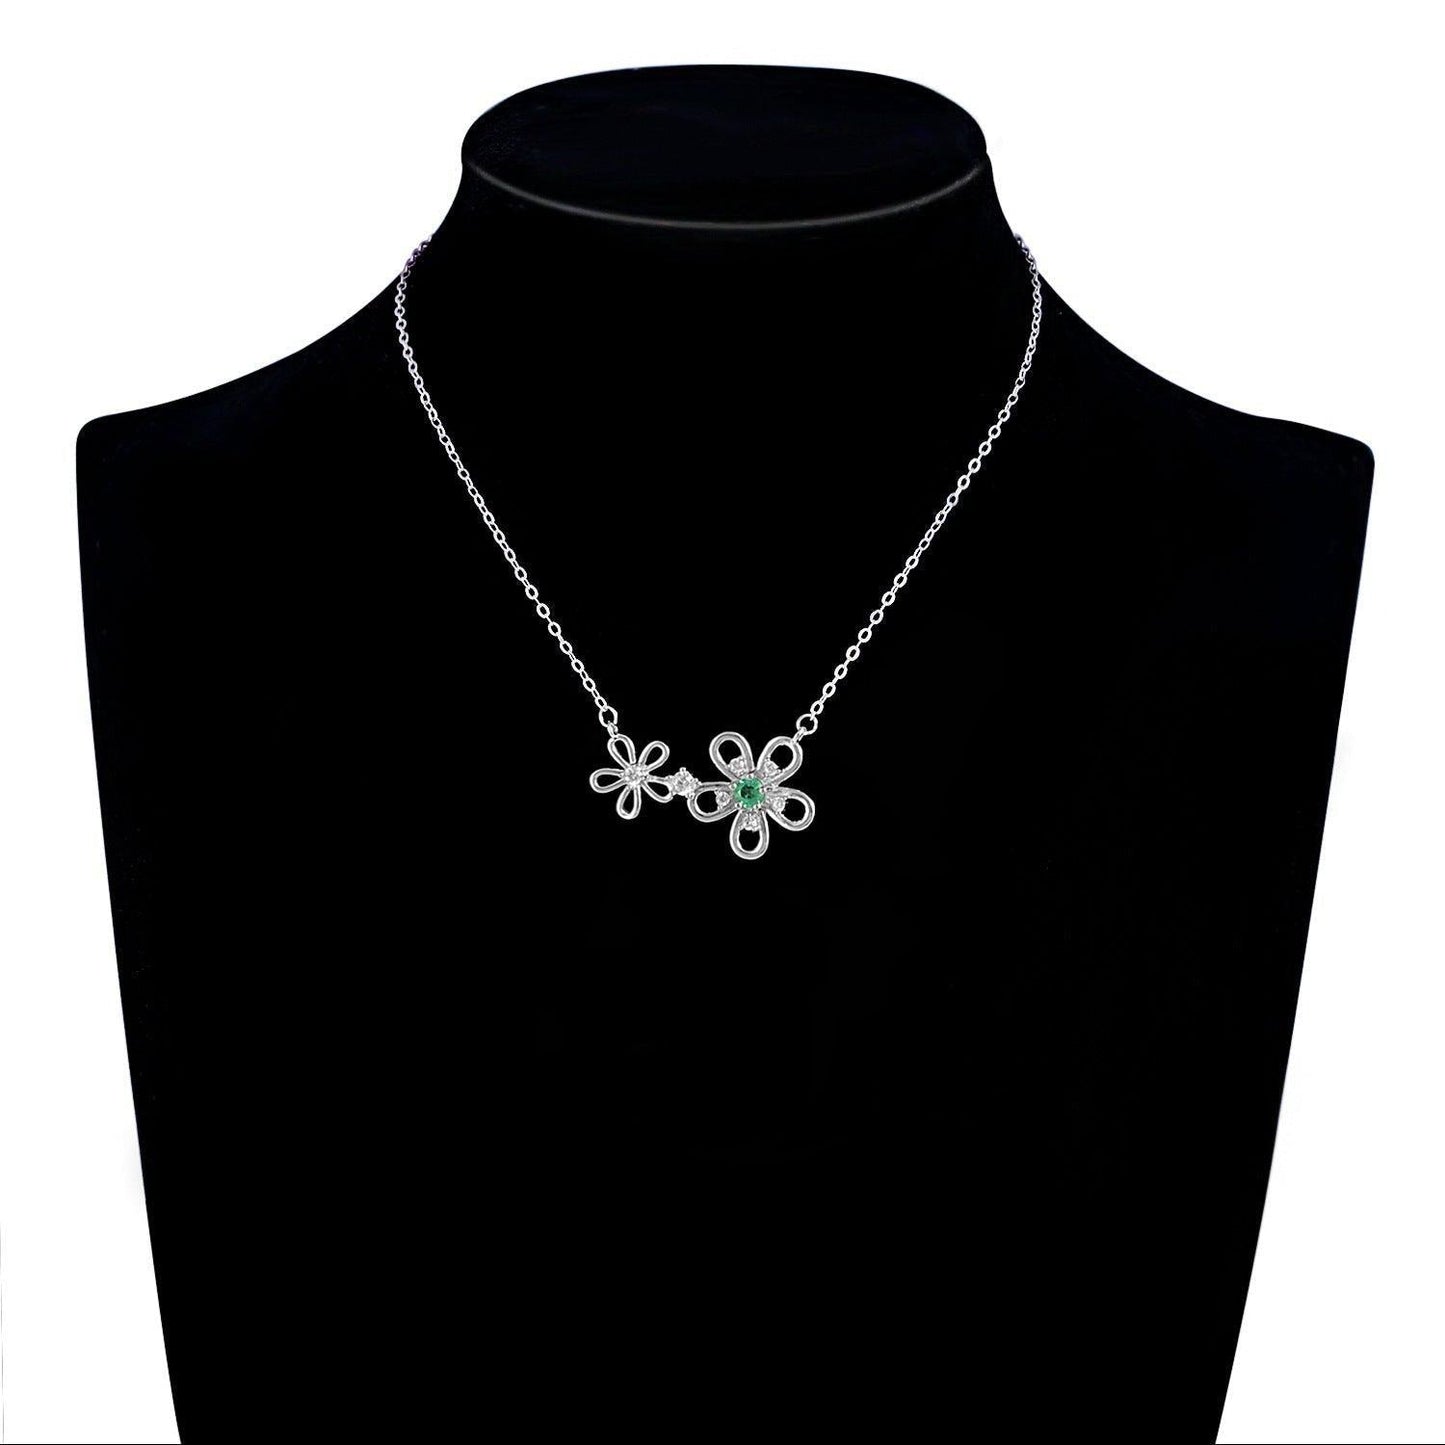 S925 Silver Girl's Versatile Collar Chain Emerald Necklace for Christmas 2023 | S925 Silver Girl's Versatile Collar Chain Emerald Necklace - undefined | Emerald Necklace, S925 silver fashion emerald necklace, S925 Silver necklace | From Hunny Life | hunnylife.com